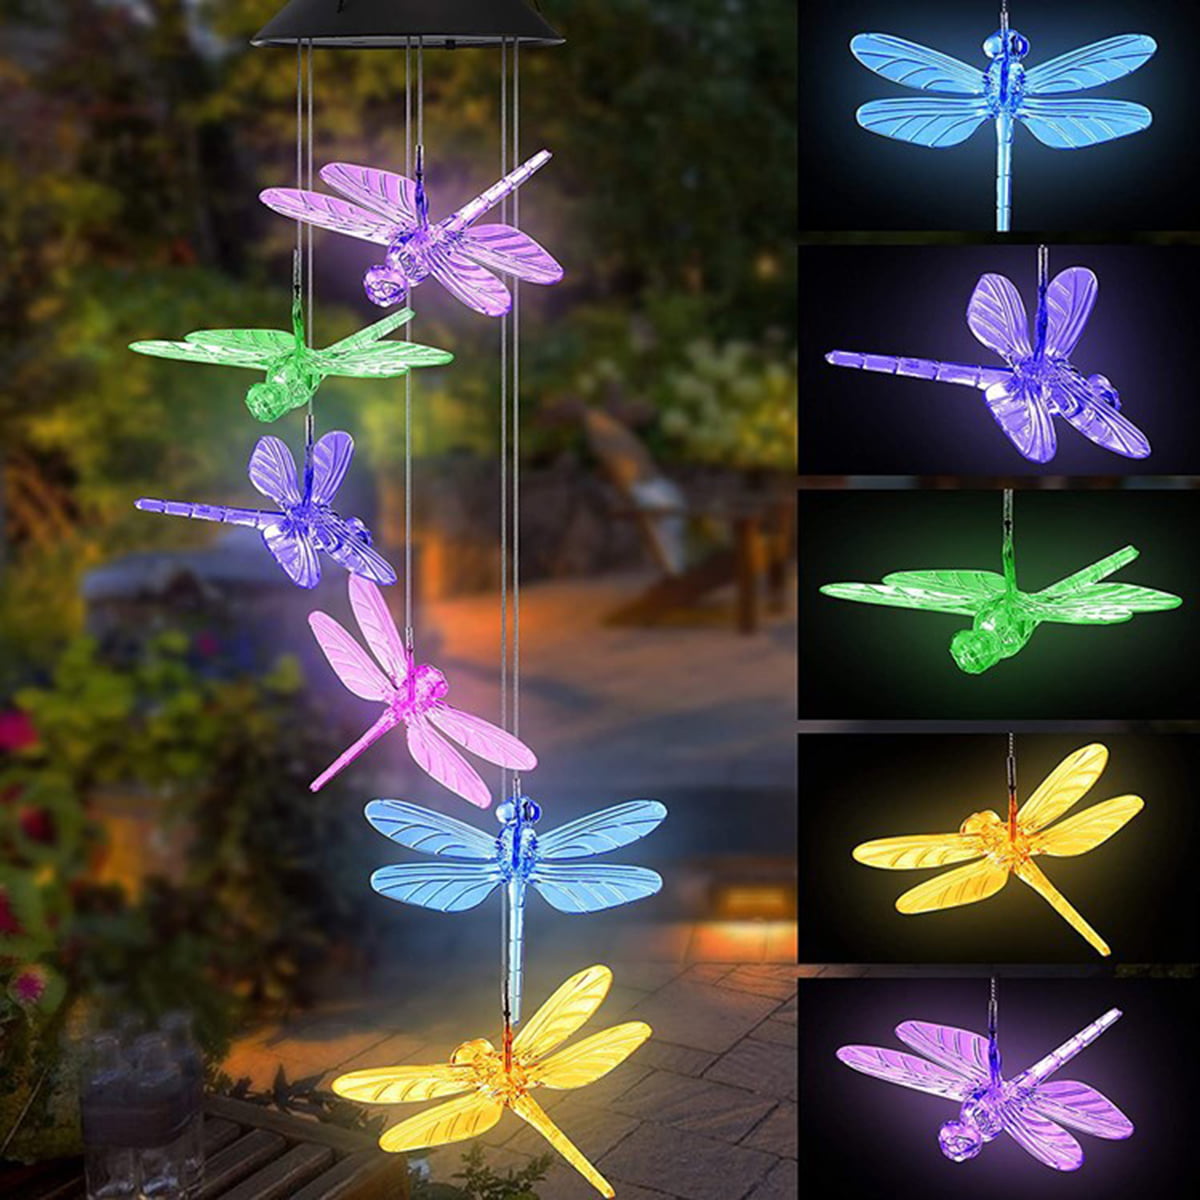 Solar Powered Color-Changing LED Hummingbird Wind Chime Lights Yard Garden Decor 